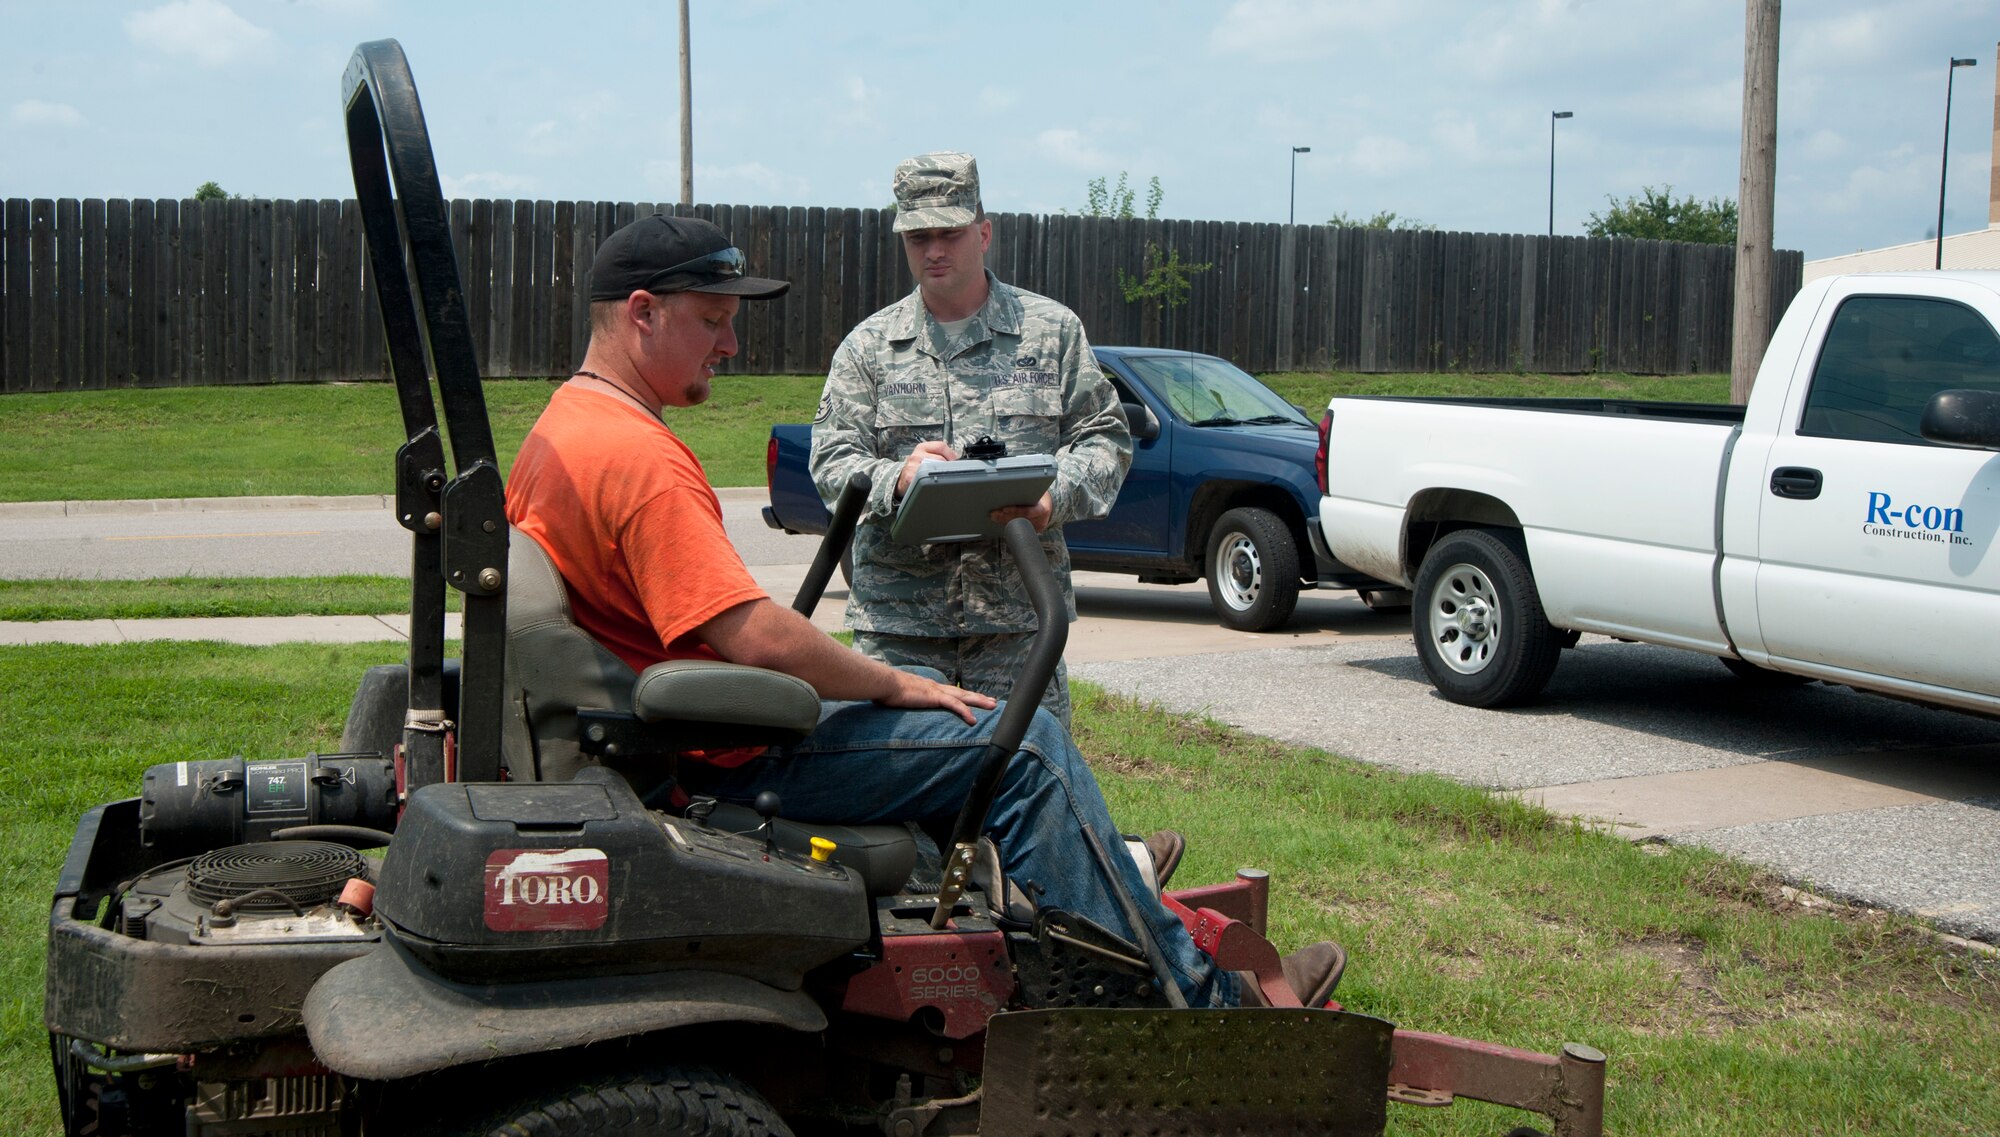 Staff Sgt. David VanHorn, 22nd Civil Engineer contracting officer, performs a monthly inspection with a grounds contractor Aug. 15, 2013, at McConnell Air Force Base, Kan. These inspections ensure that the work performed by the contractors is up to Air Force Standards. (U.S. Air Force photo/Airman 1st Class Colby L. Hardin)